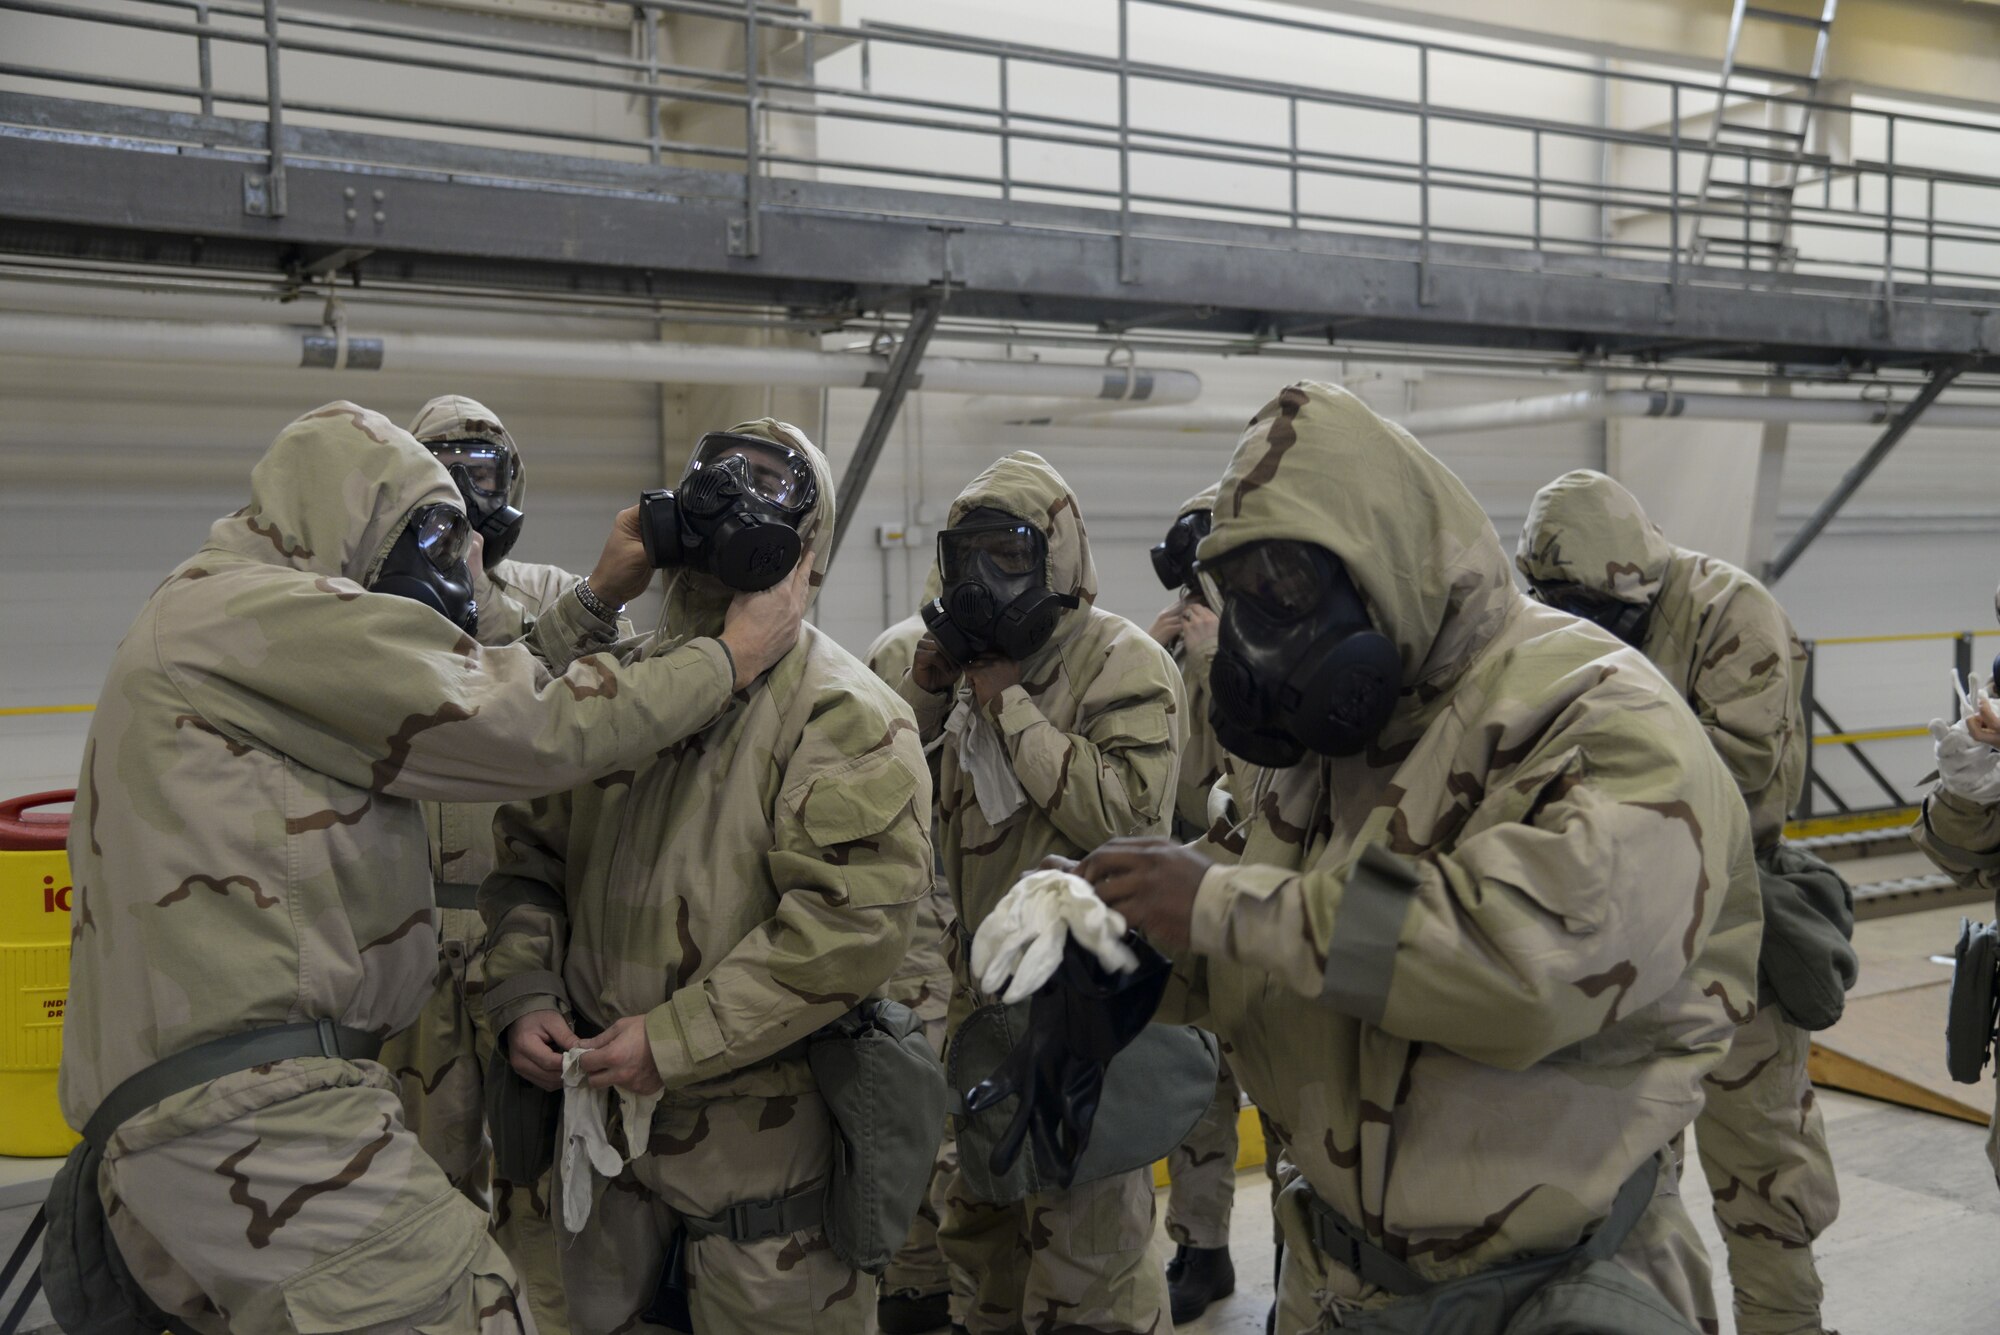 Col. Ethan Griffin, 436th Airlift Wing commander, (far left) performs a buddy check of another Airman’s Mission Oriented Protective Posture, also known as MOPP gear, during a Chemical, Biological, Radiological and Nuclear (CBRN) training session Jan. 31, 2018, at Dover Air Force Base, Del. When worn properly, MOPP gear provides an airtight seal, completely encapsulating the wearer. (U.S. Air Force photo by Staff Sgt. Aaron J. Jenne)